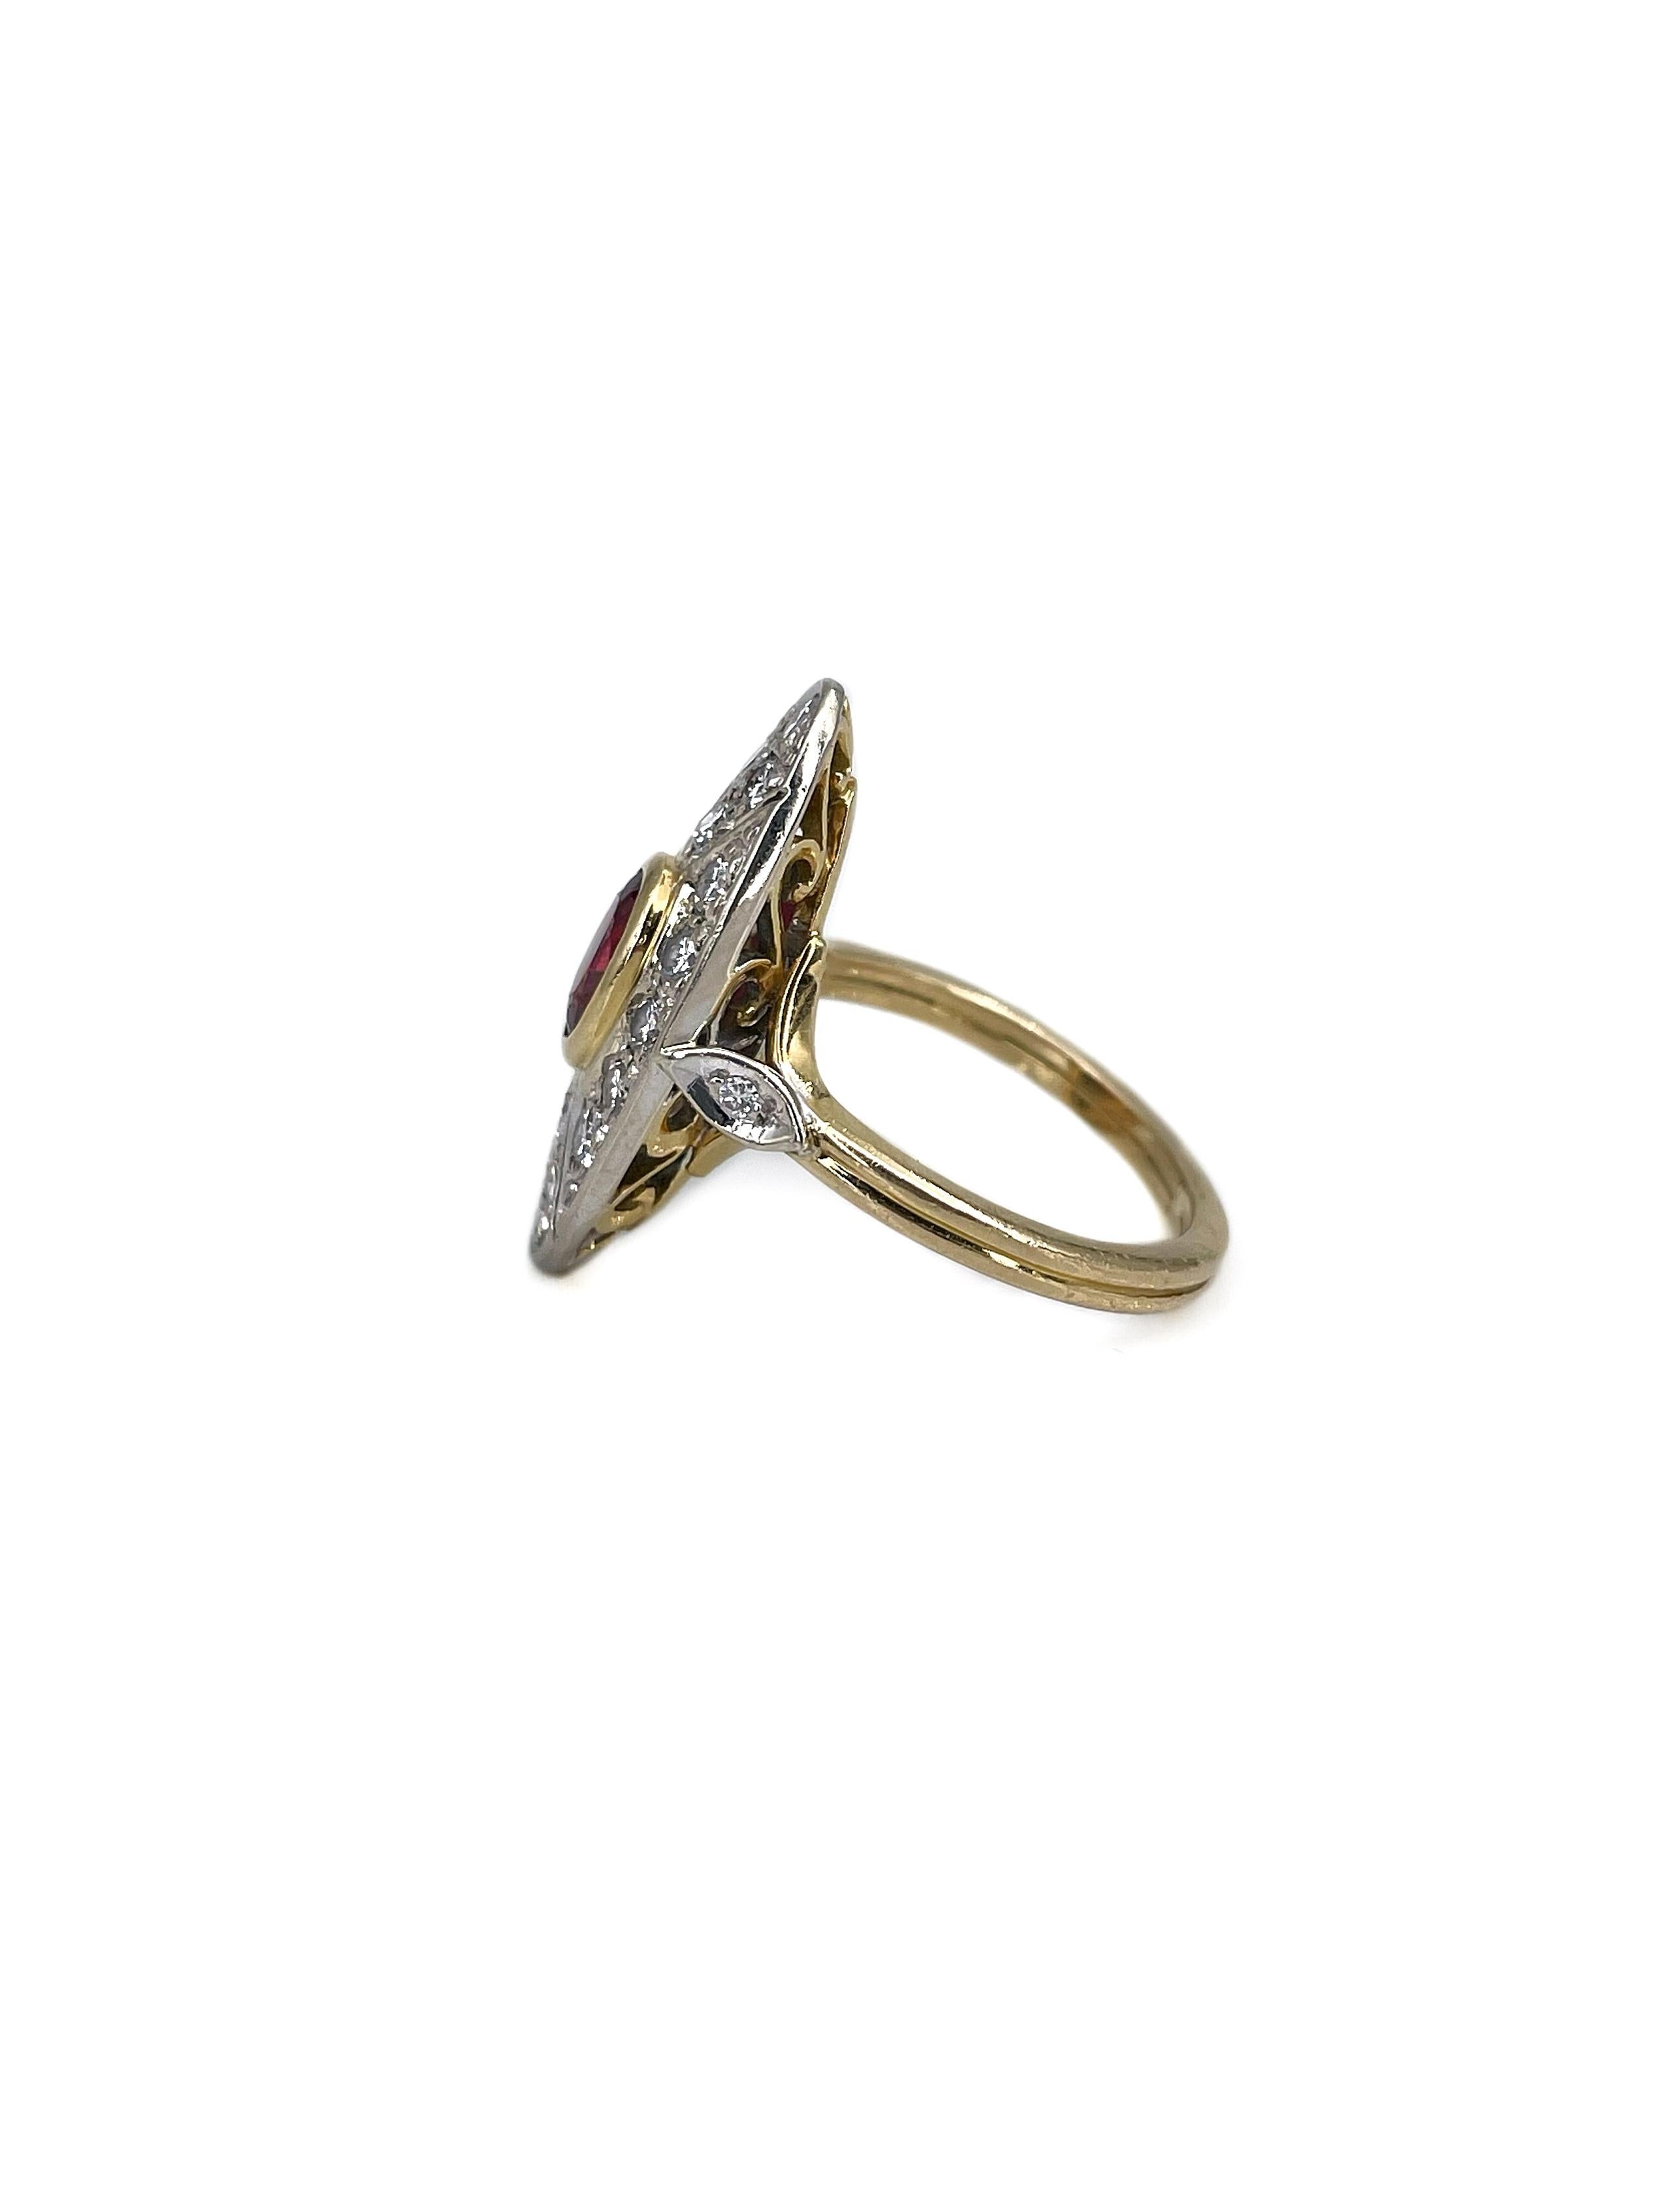 This is an Art Deco style mid XX century navette ring crafted in 18K gold. Circa 1950.

 It features:
- 1 ruby: oval cut, 0.65ct, slpR 7/4, P1
- 20 diamonds: brilliant cut, 0.55ct, RW-W, VS-SI

Weight: 5.20g 
Size: 15.75 (US 5.25)

IMPORTANT: please